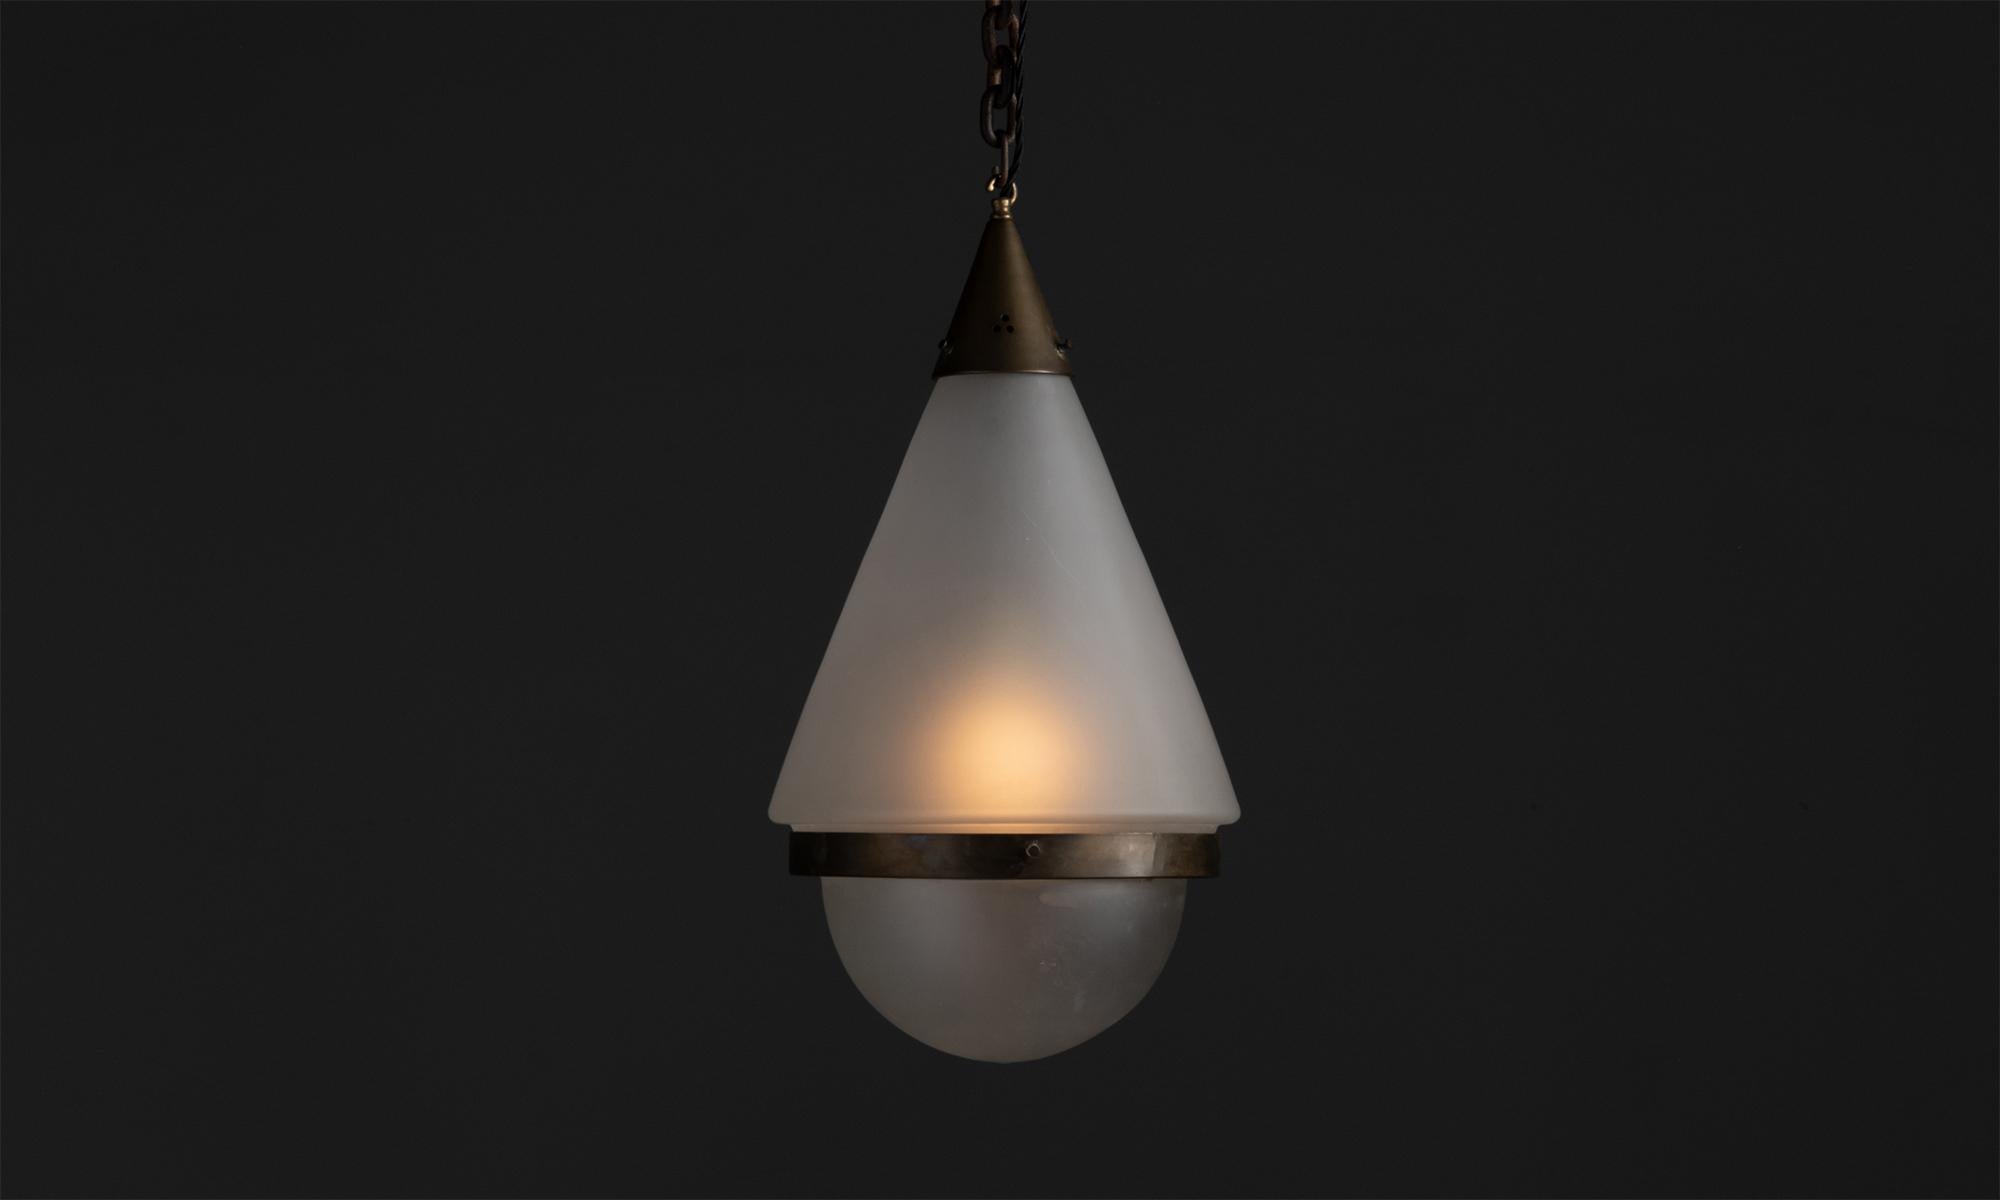 Frosted Glass Pendant by Gispen, Netherlands, circa 1930

Measures 12”dia x 22.5”h

Not UL Listed.